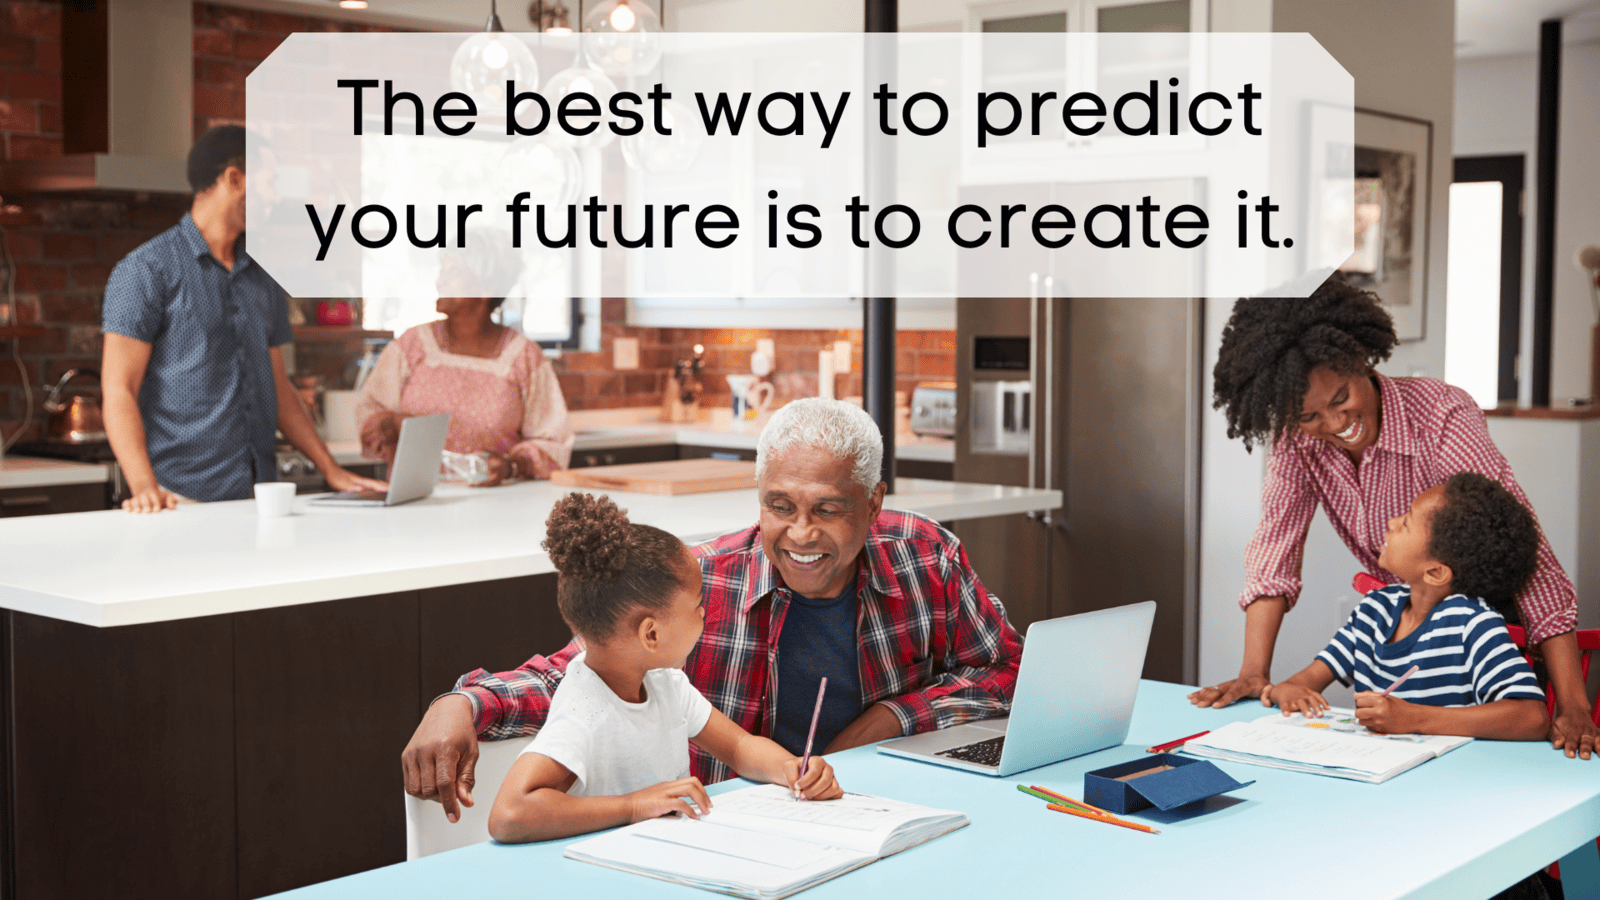 Image of generations at the table - The best way to predict your future is to create it.